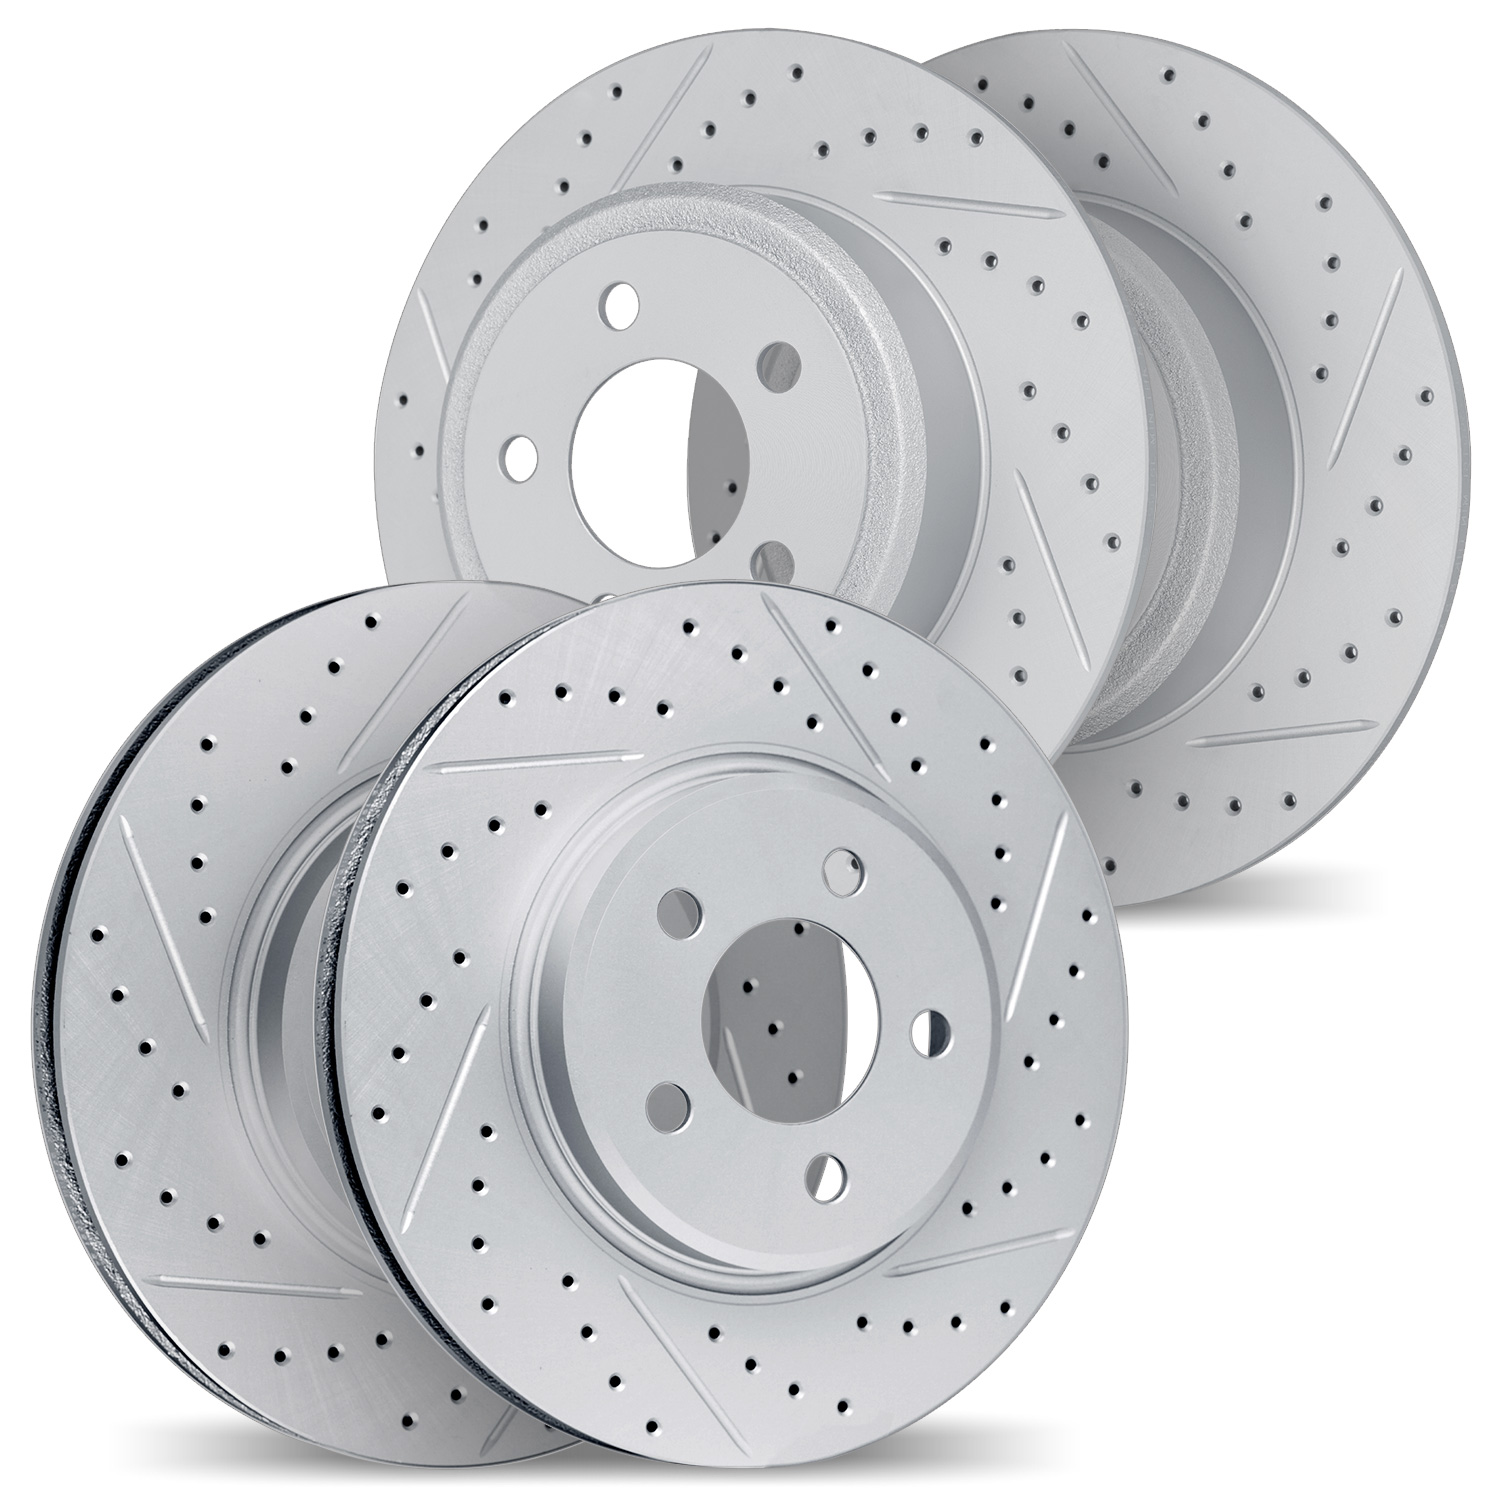 2004-65005 Geoperformance Drilled/Slotted Brake Rotors, 1999-2002 GM, Position: Front and Rear